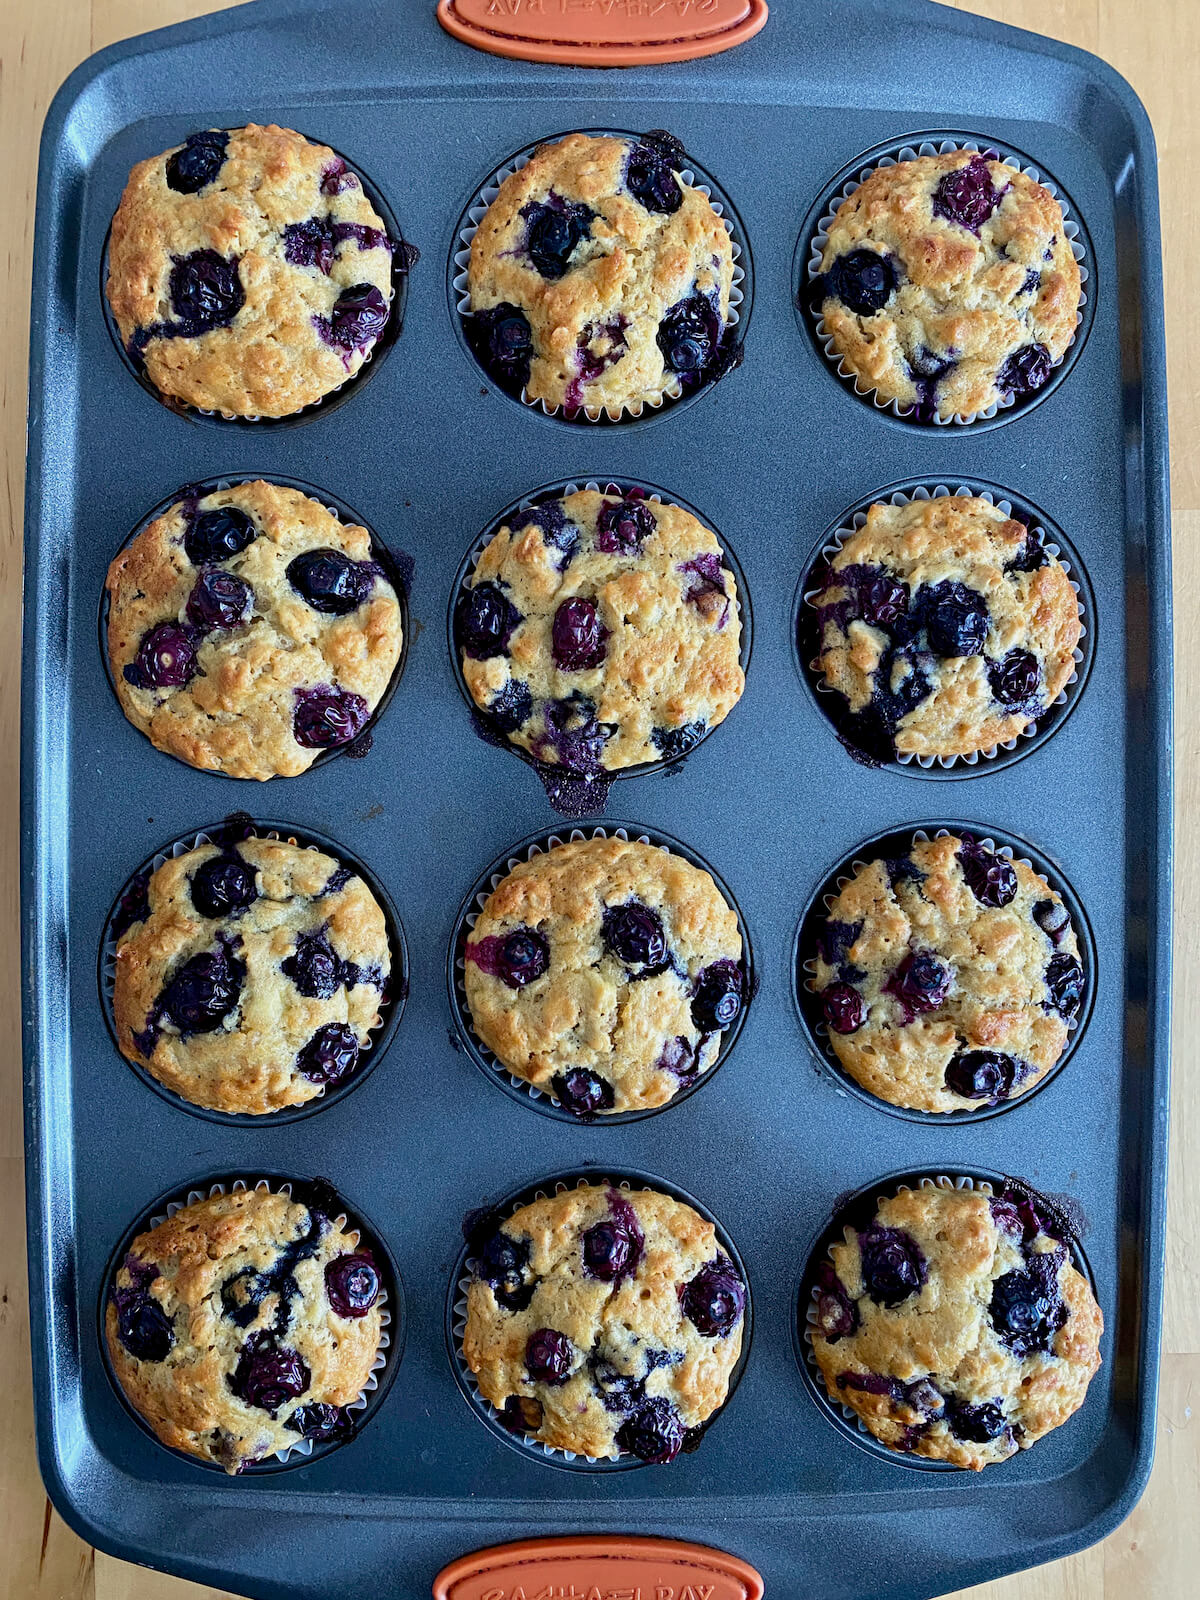 The finished blueberry banana oatmeal muffins in a muffin tin.